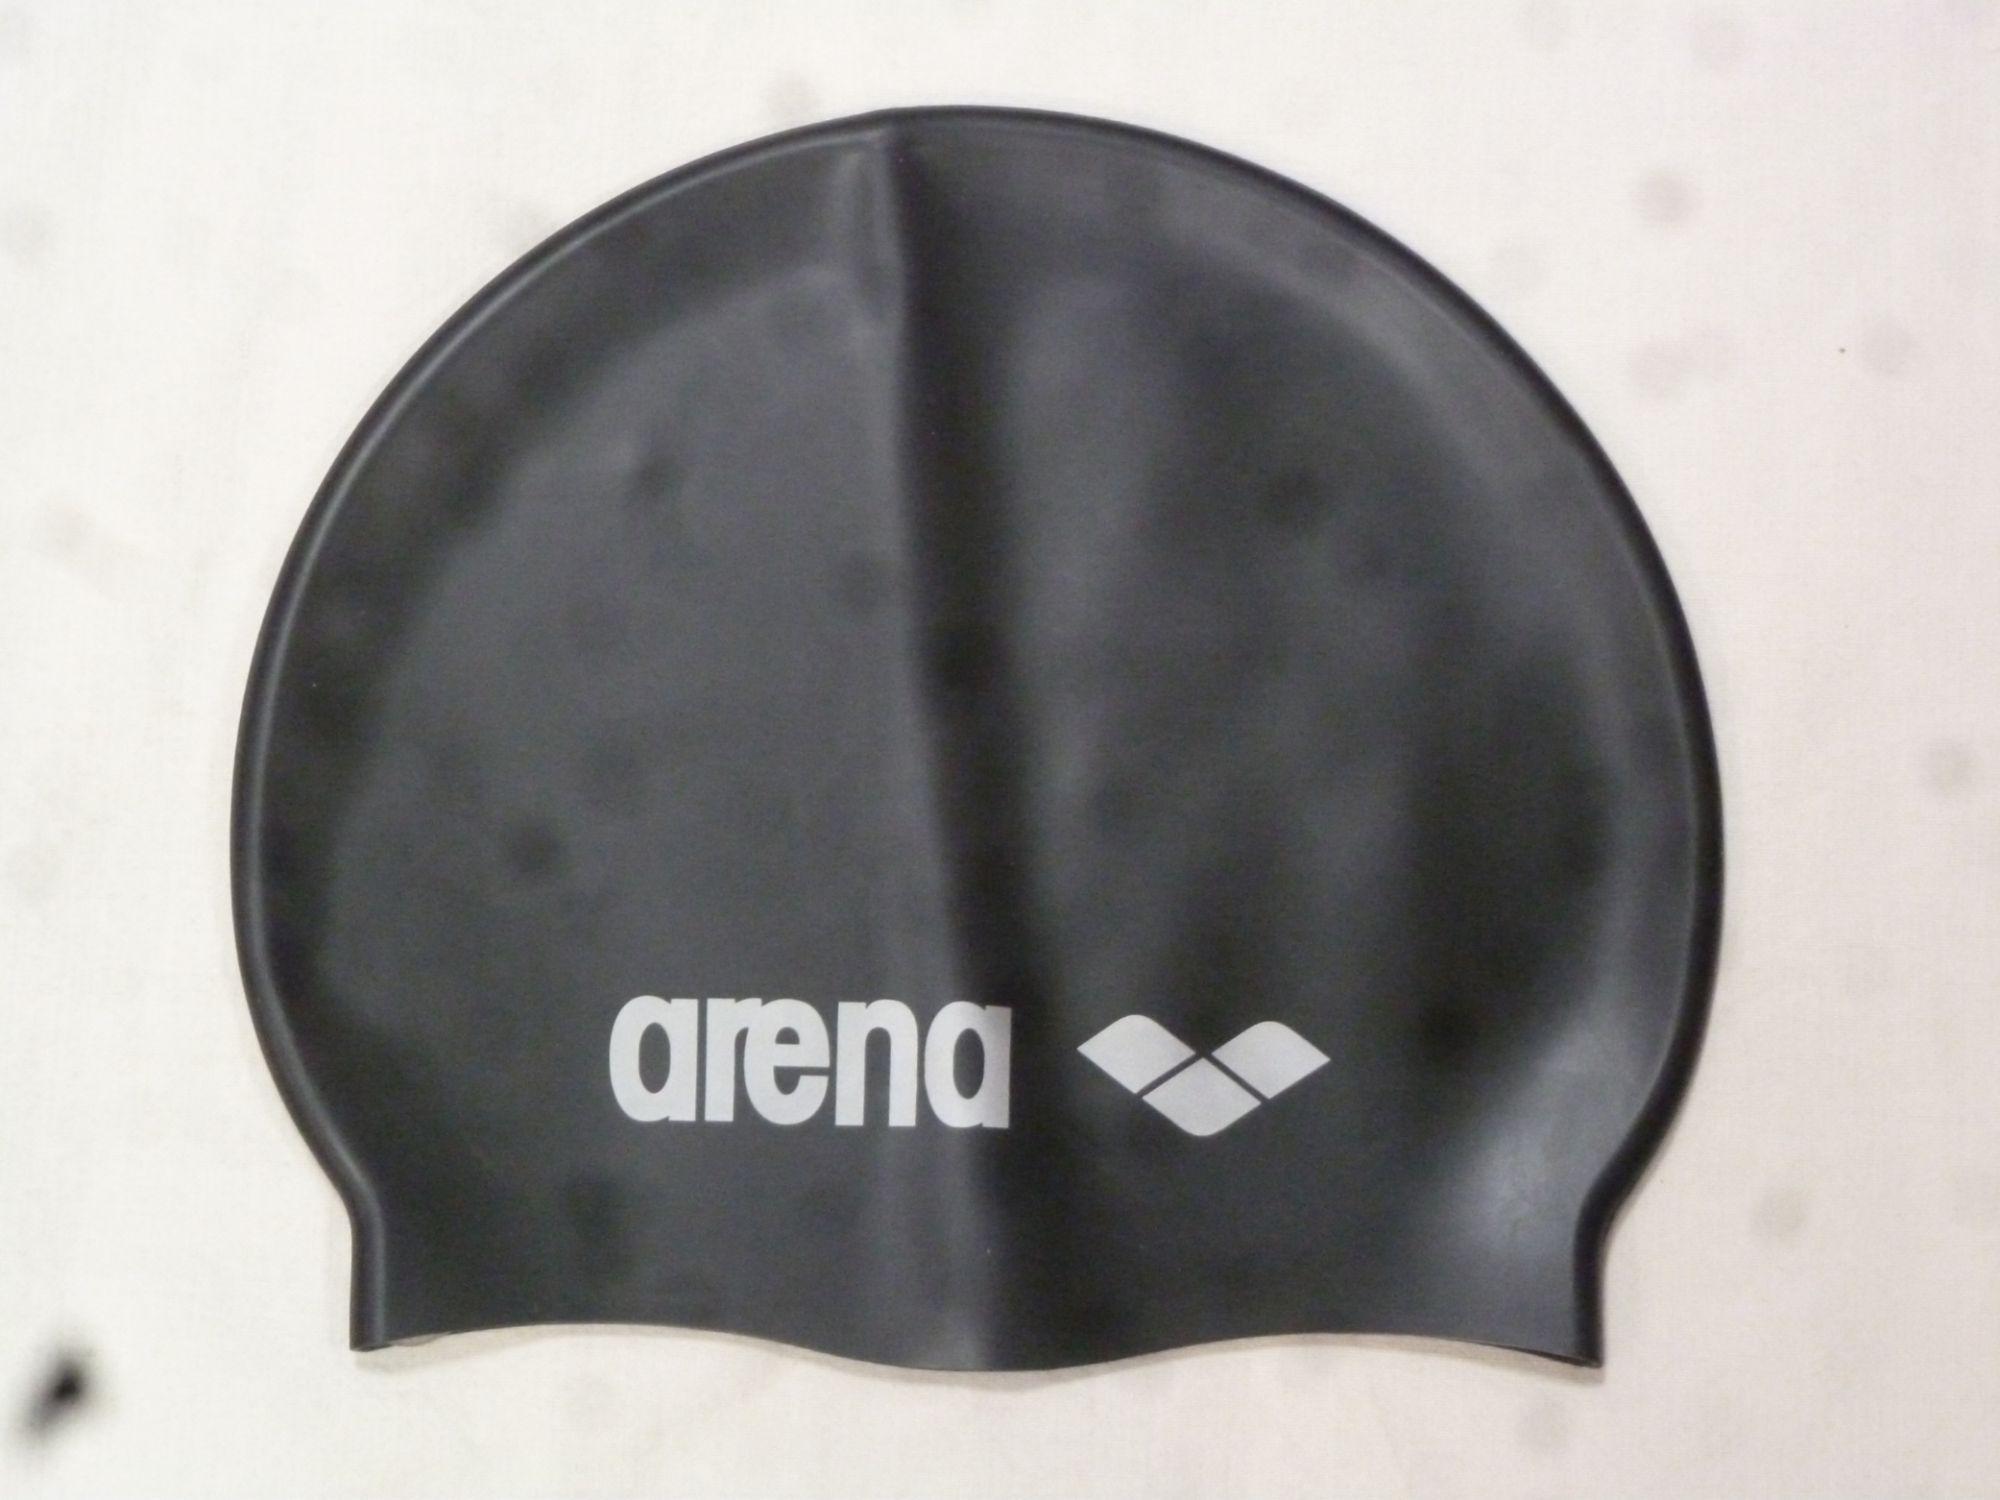 Arena Classic Silicone : : Sports et Loisirs